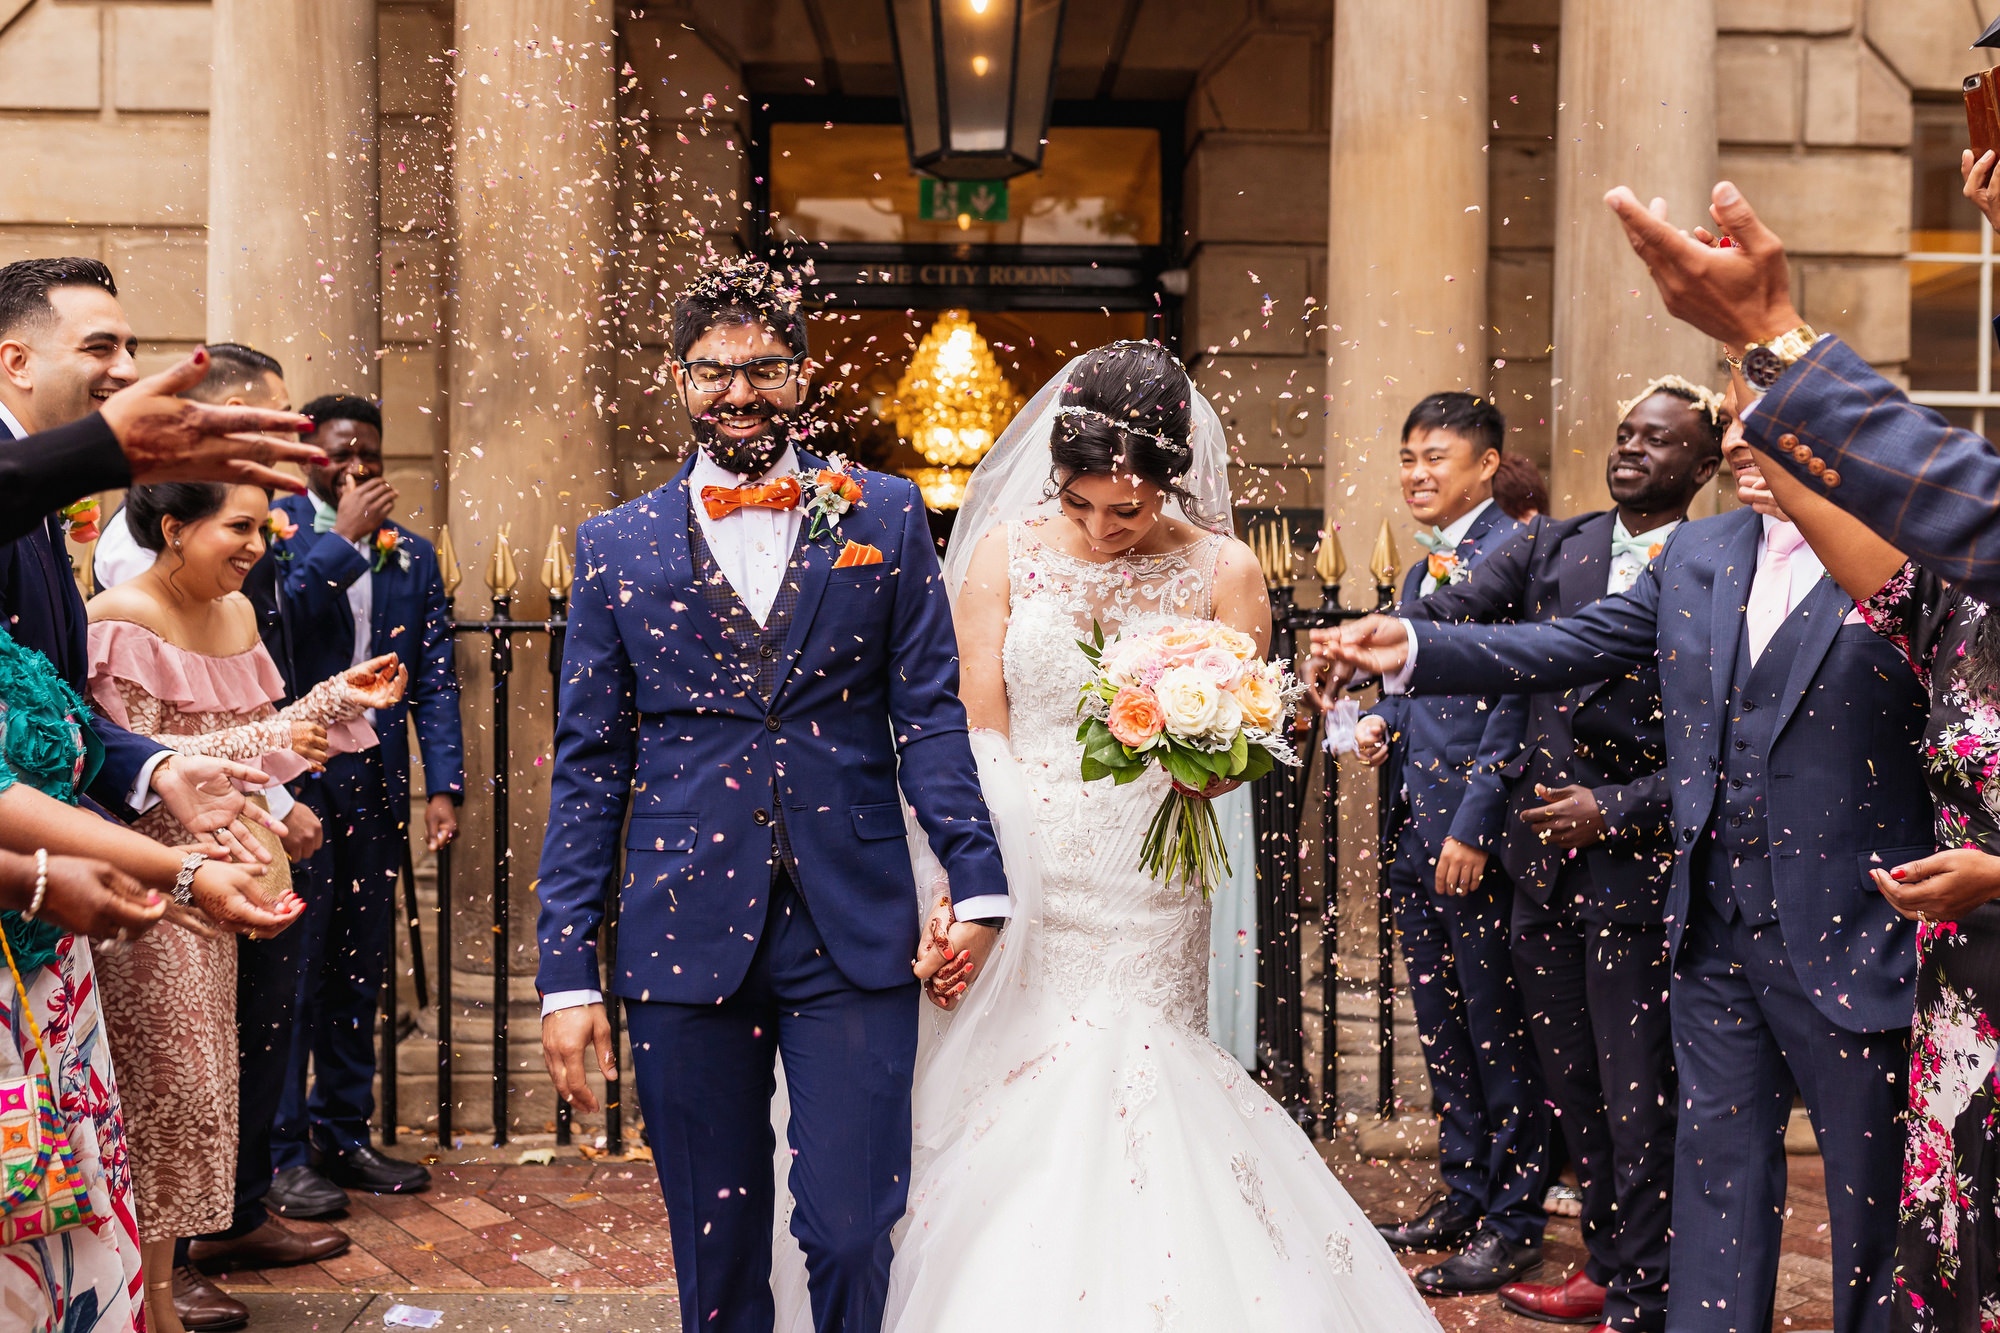 The City Rooms, Leicester, Documentary Wedding Photographer, confetti